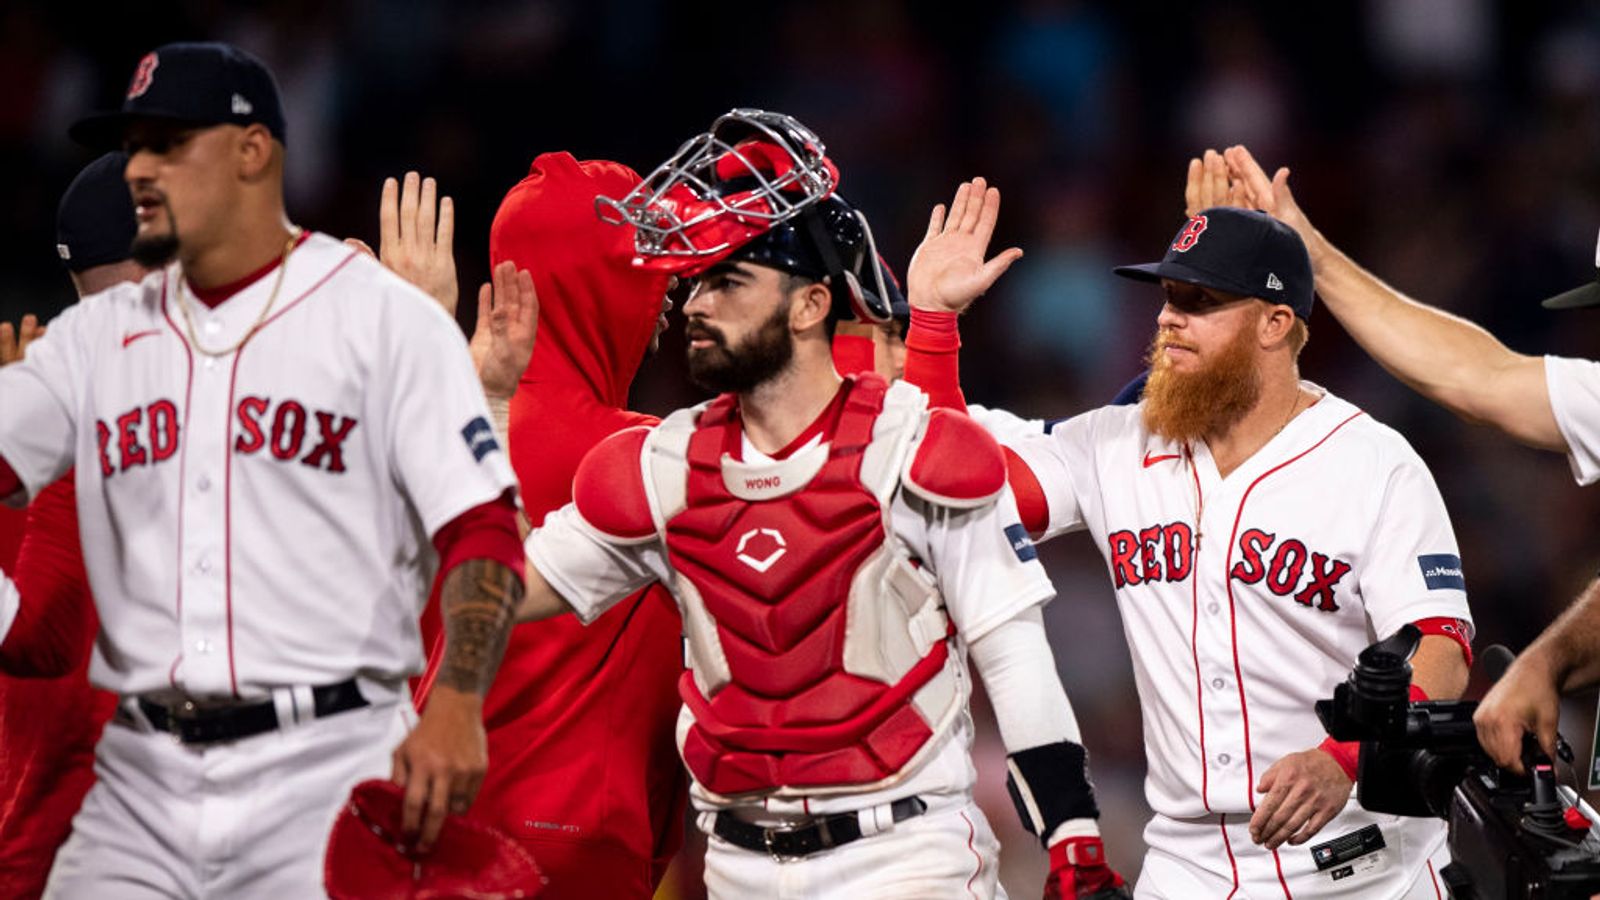 Bedard: After demolishing Yankees, time is now for Red Sox to make